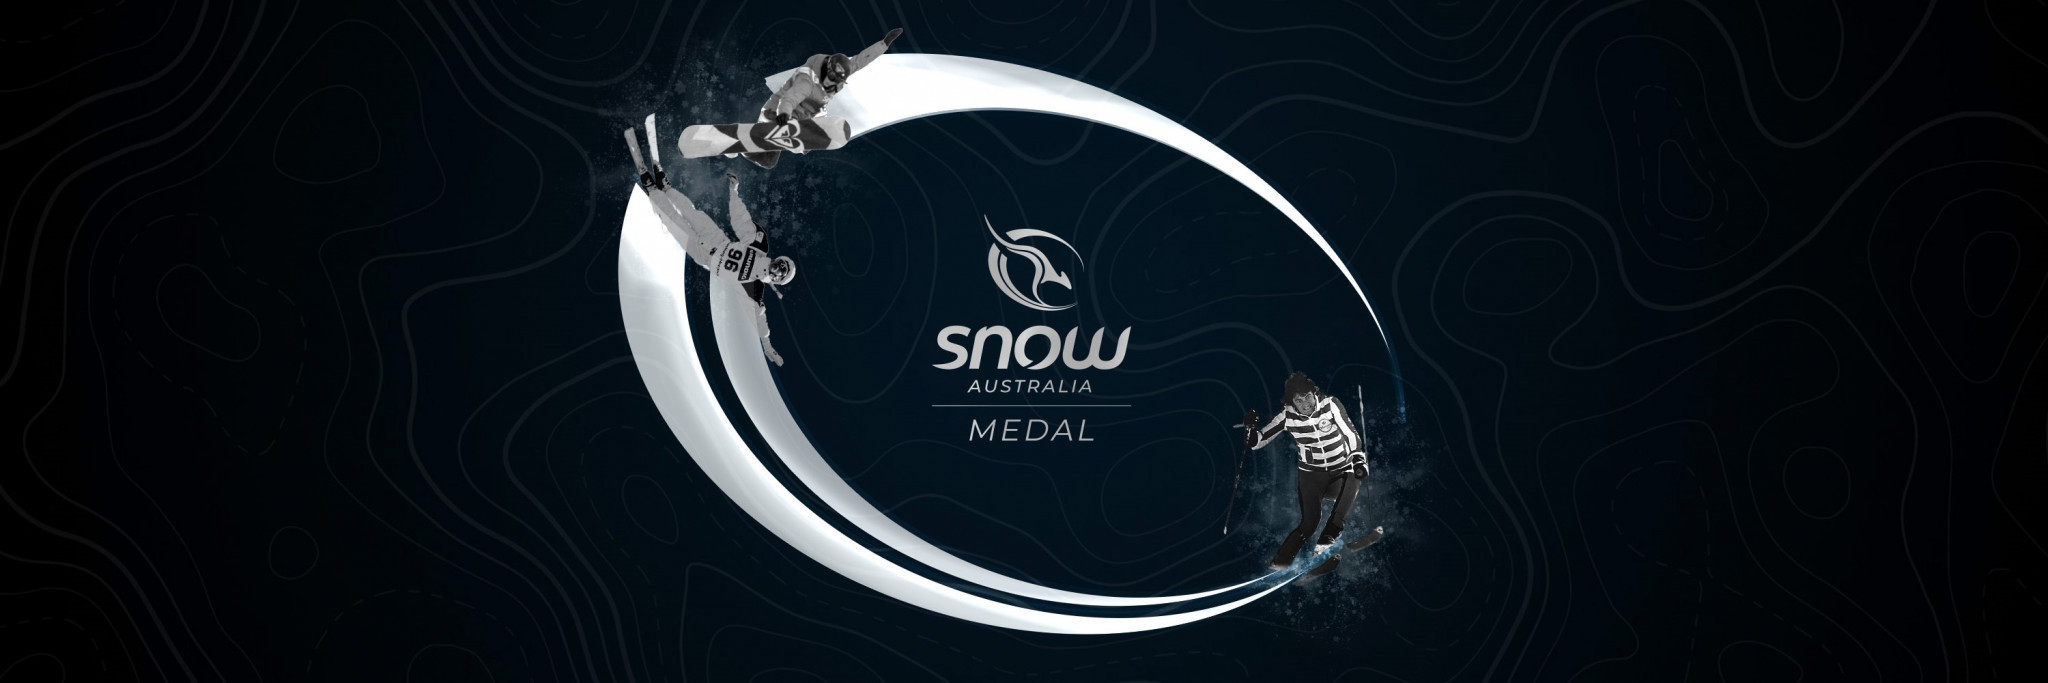 A design for the Snow Australia Medal will be finalised later in the year ©Snow Australia